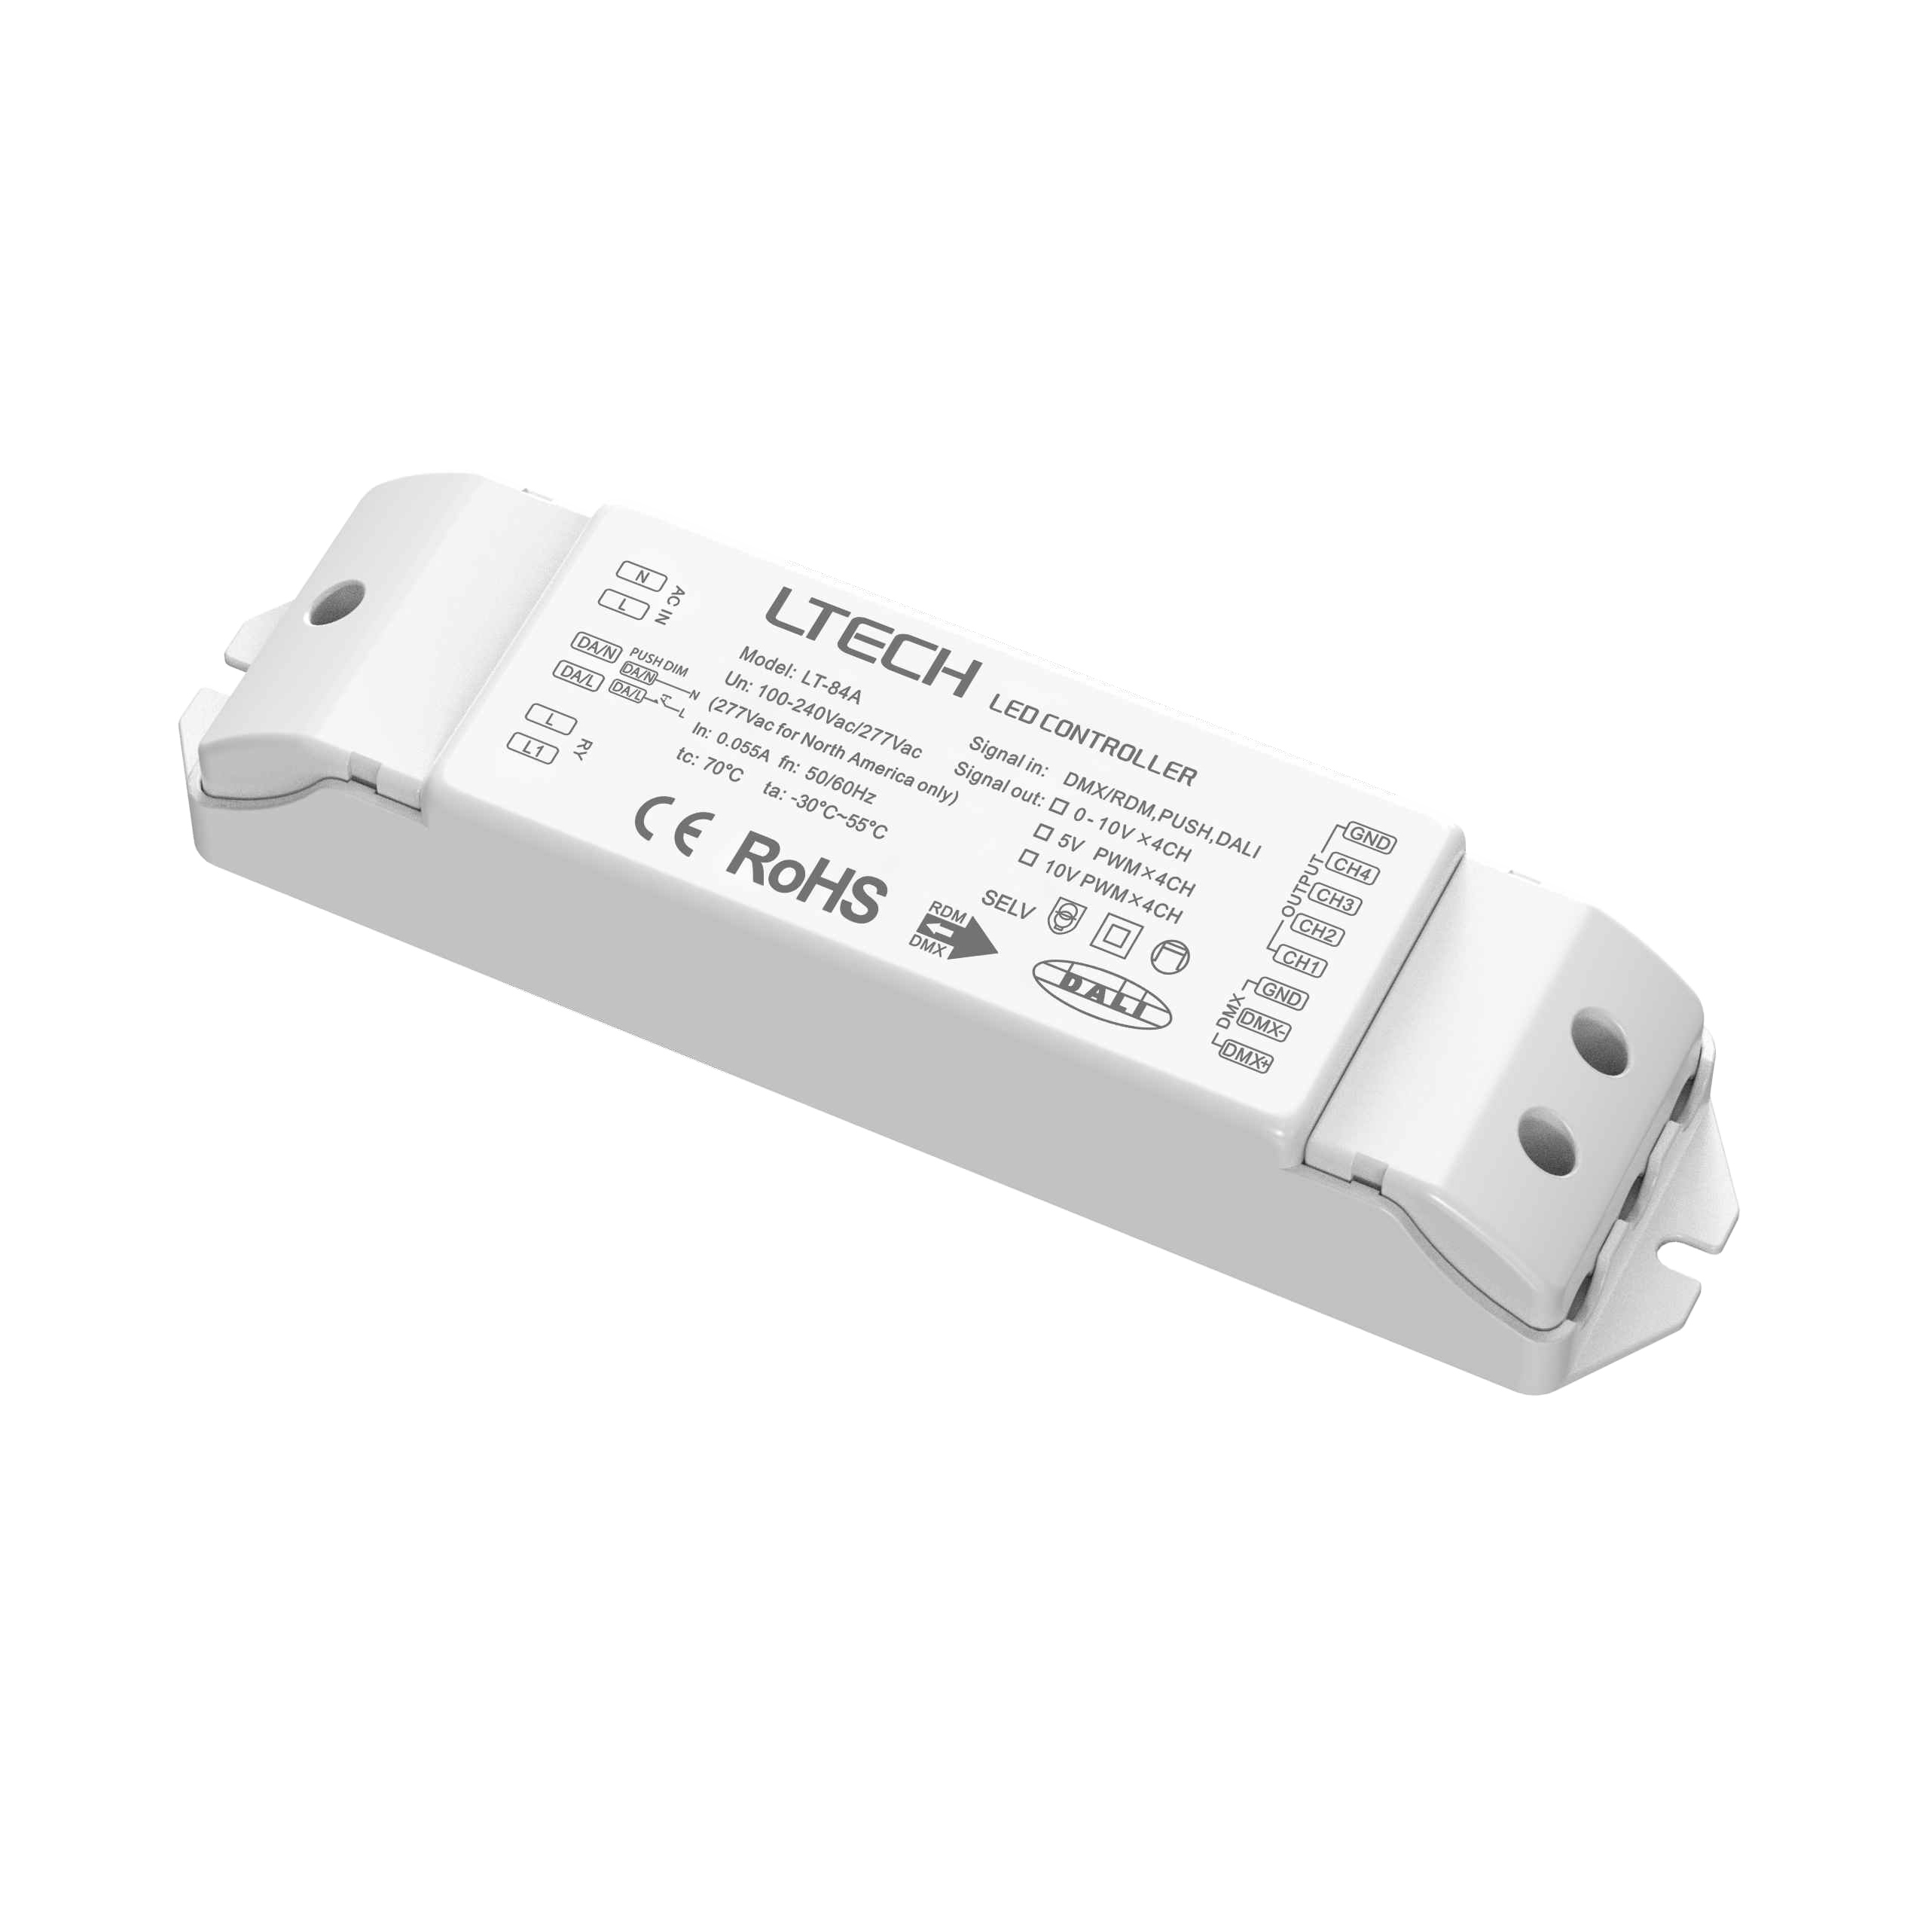 LT-840-010V DMX512 to 4CH 0-10V Dimming Converter - Replaced By LT-84A